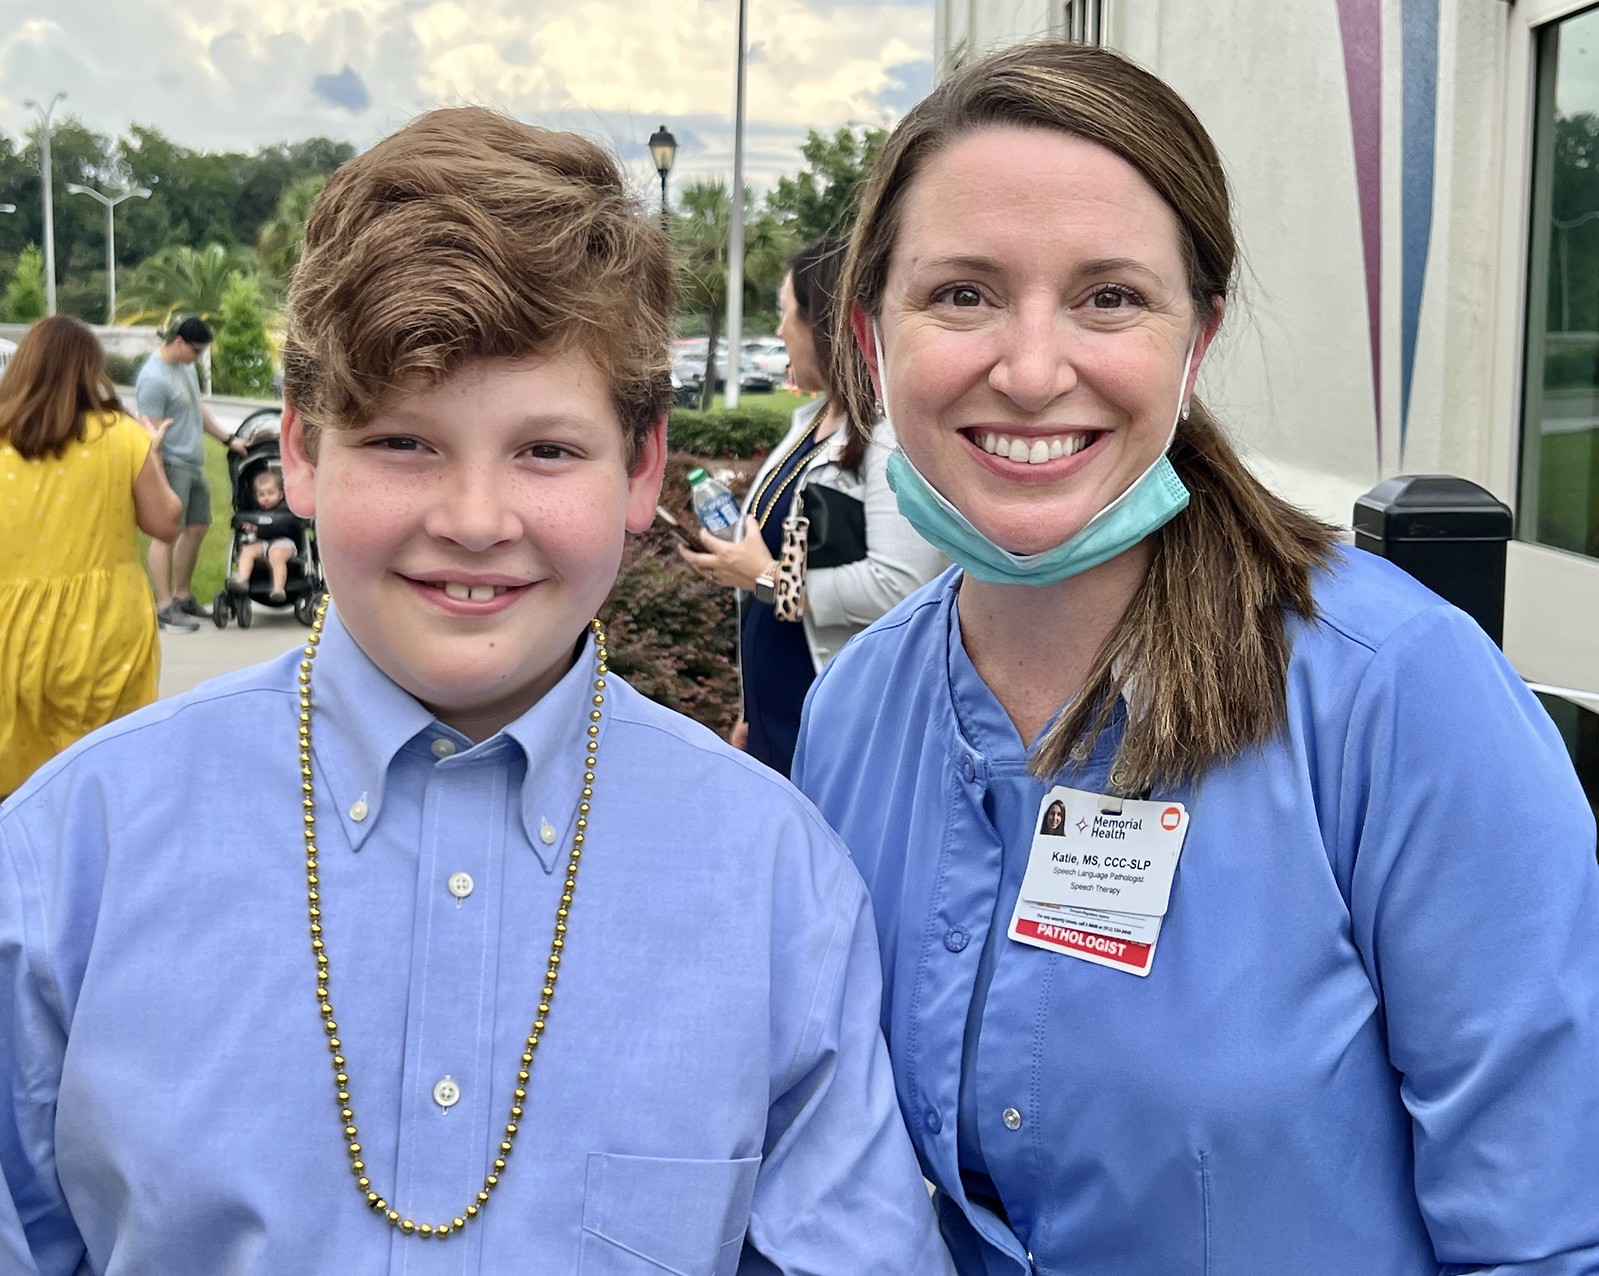 CURE Childhood Cancer Ice Cream Social at Memorial Children’s Hospital